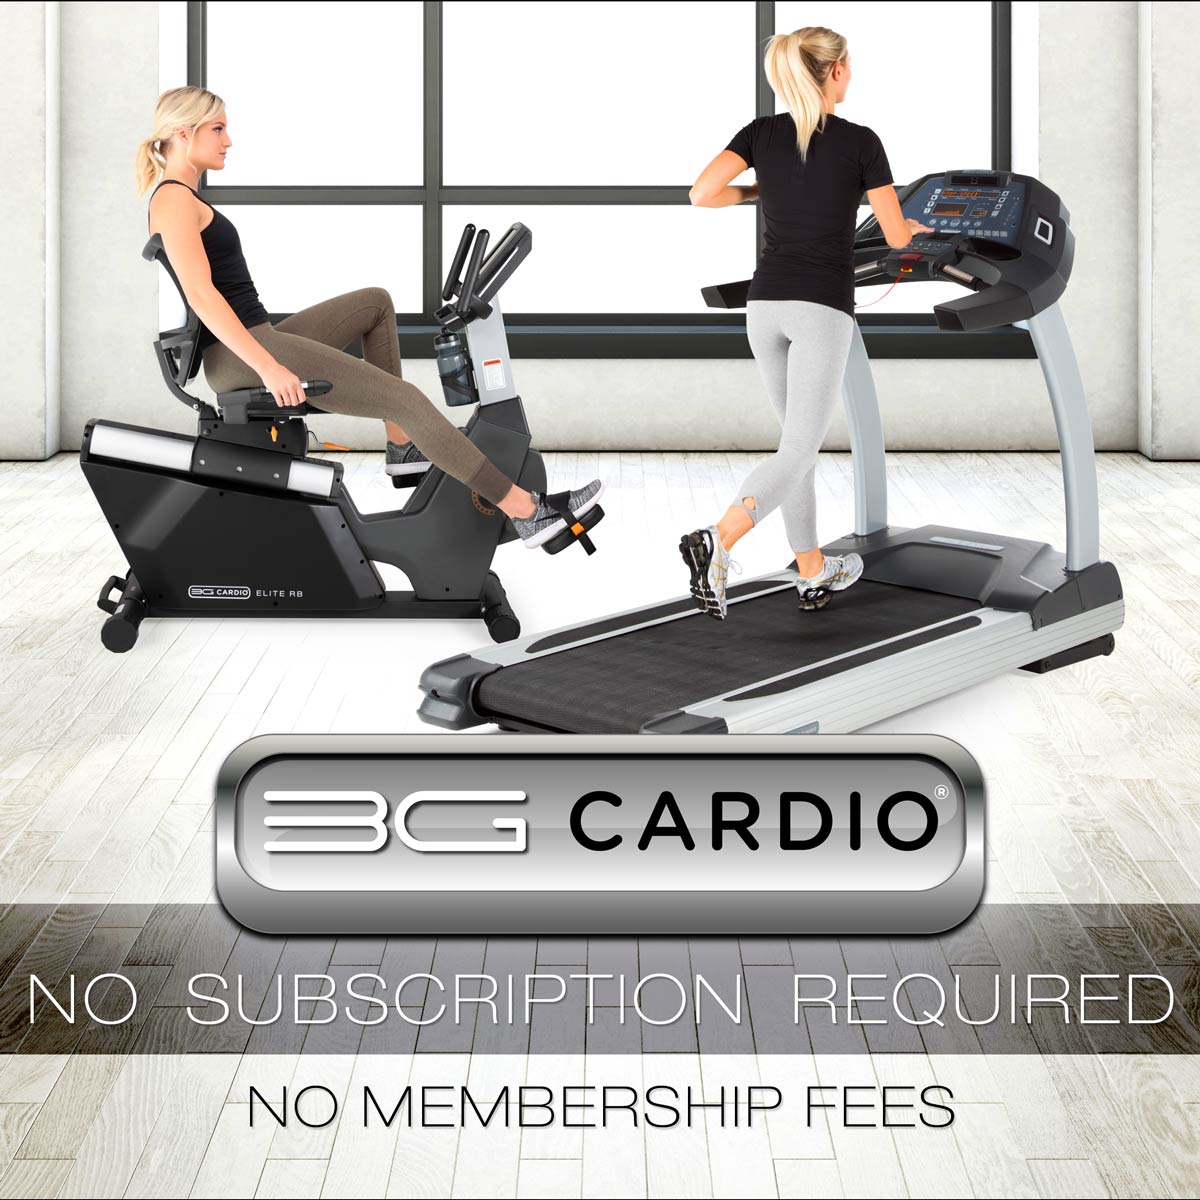 No Monthly Subscription Required for 3G Cardio Products